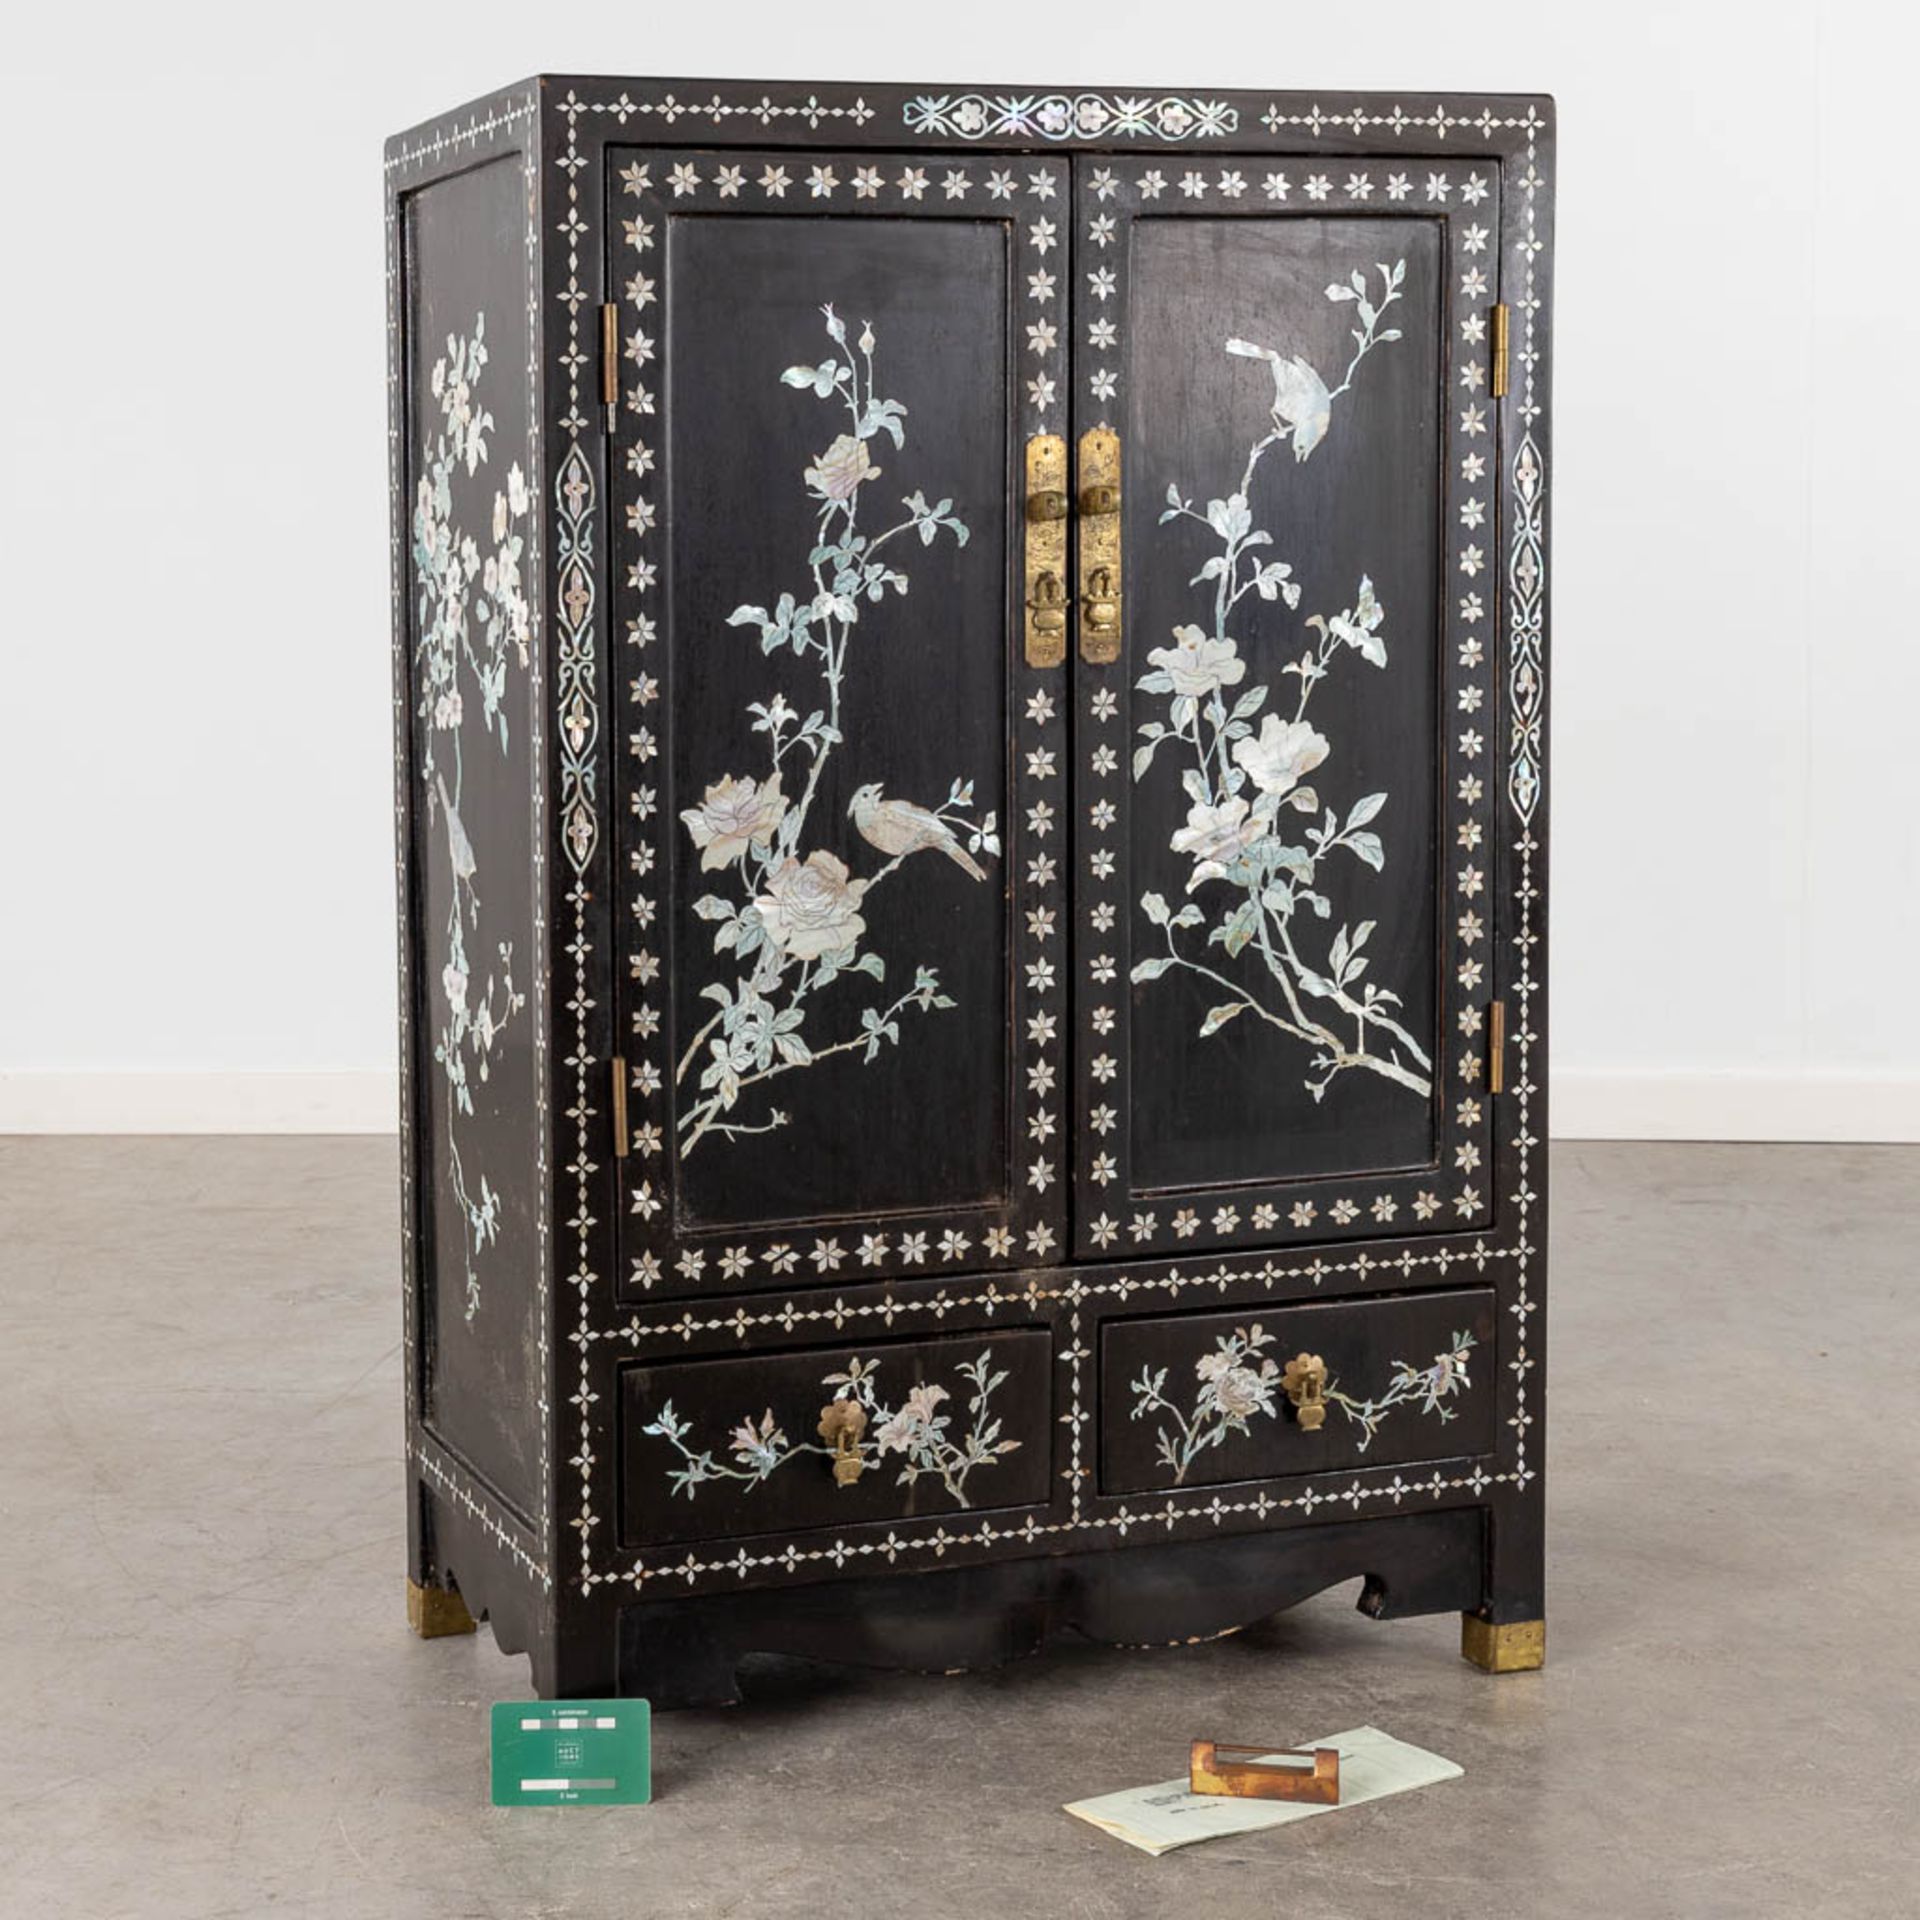 A Chinoiserie cabinet, mother of pearl inlay in ebonised wood. 20th C. (D:31 x W:61 x H:92 cm) - Image 2 of 14